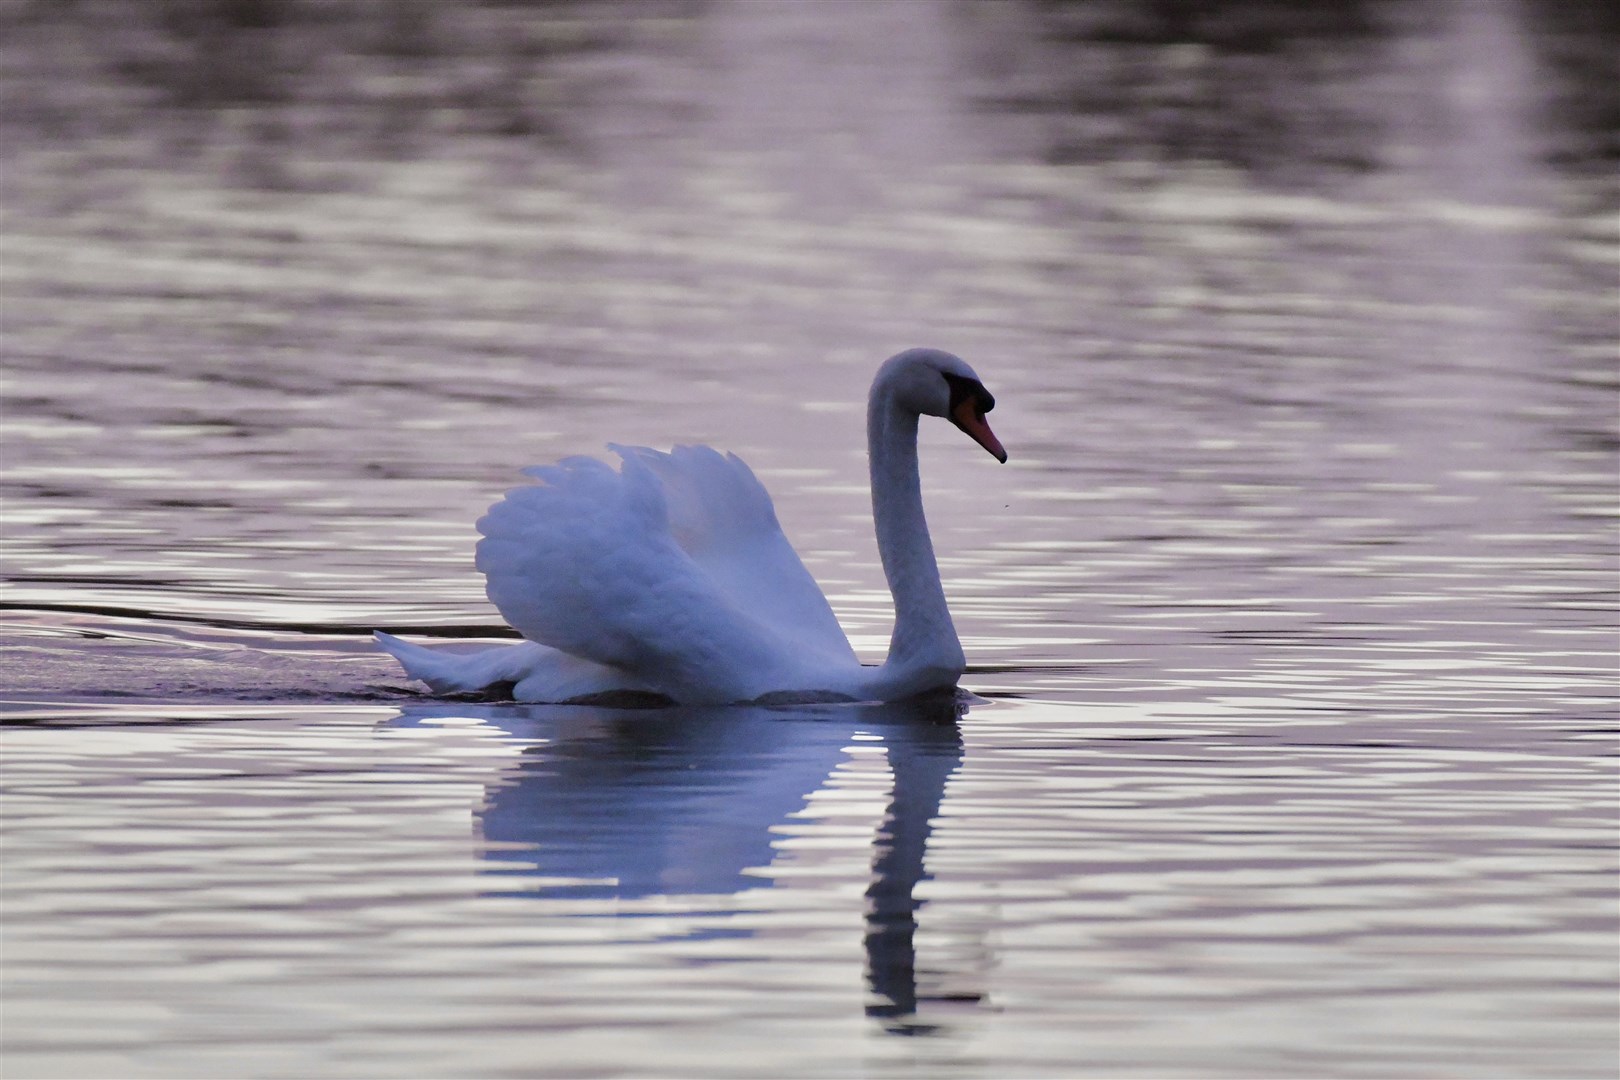 Hazel Thomson, from Elgin, took this photo of a swan on Spynie Loch.